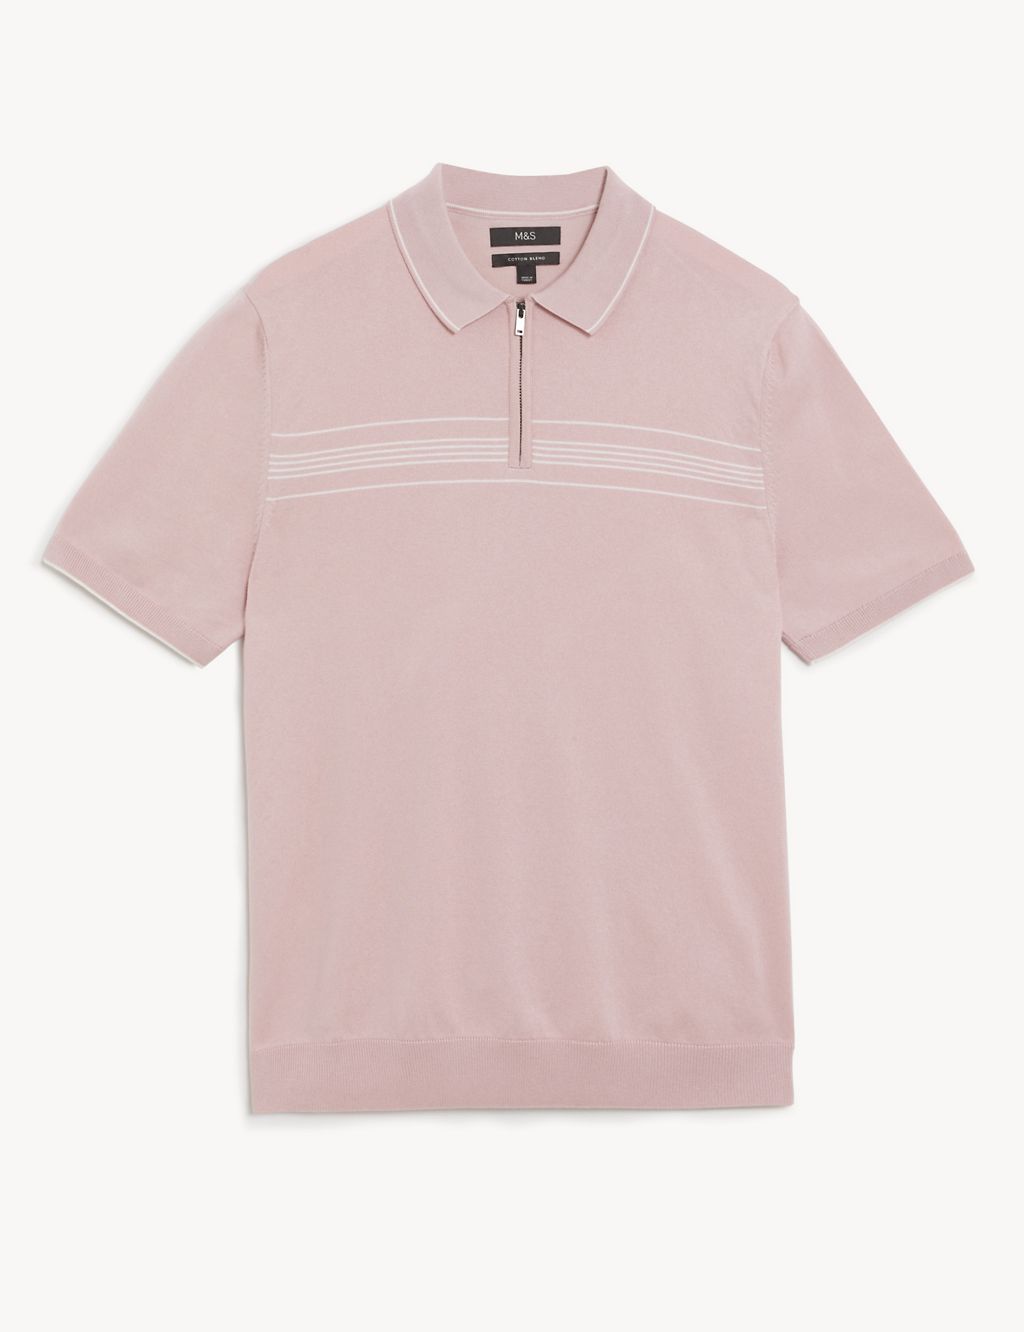 Cotton Modal Chest Stripe Knitted Polo Shirt | M&S Collection | M&S